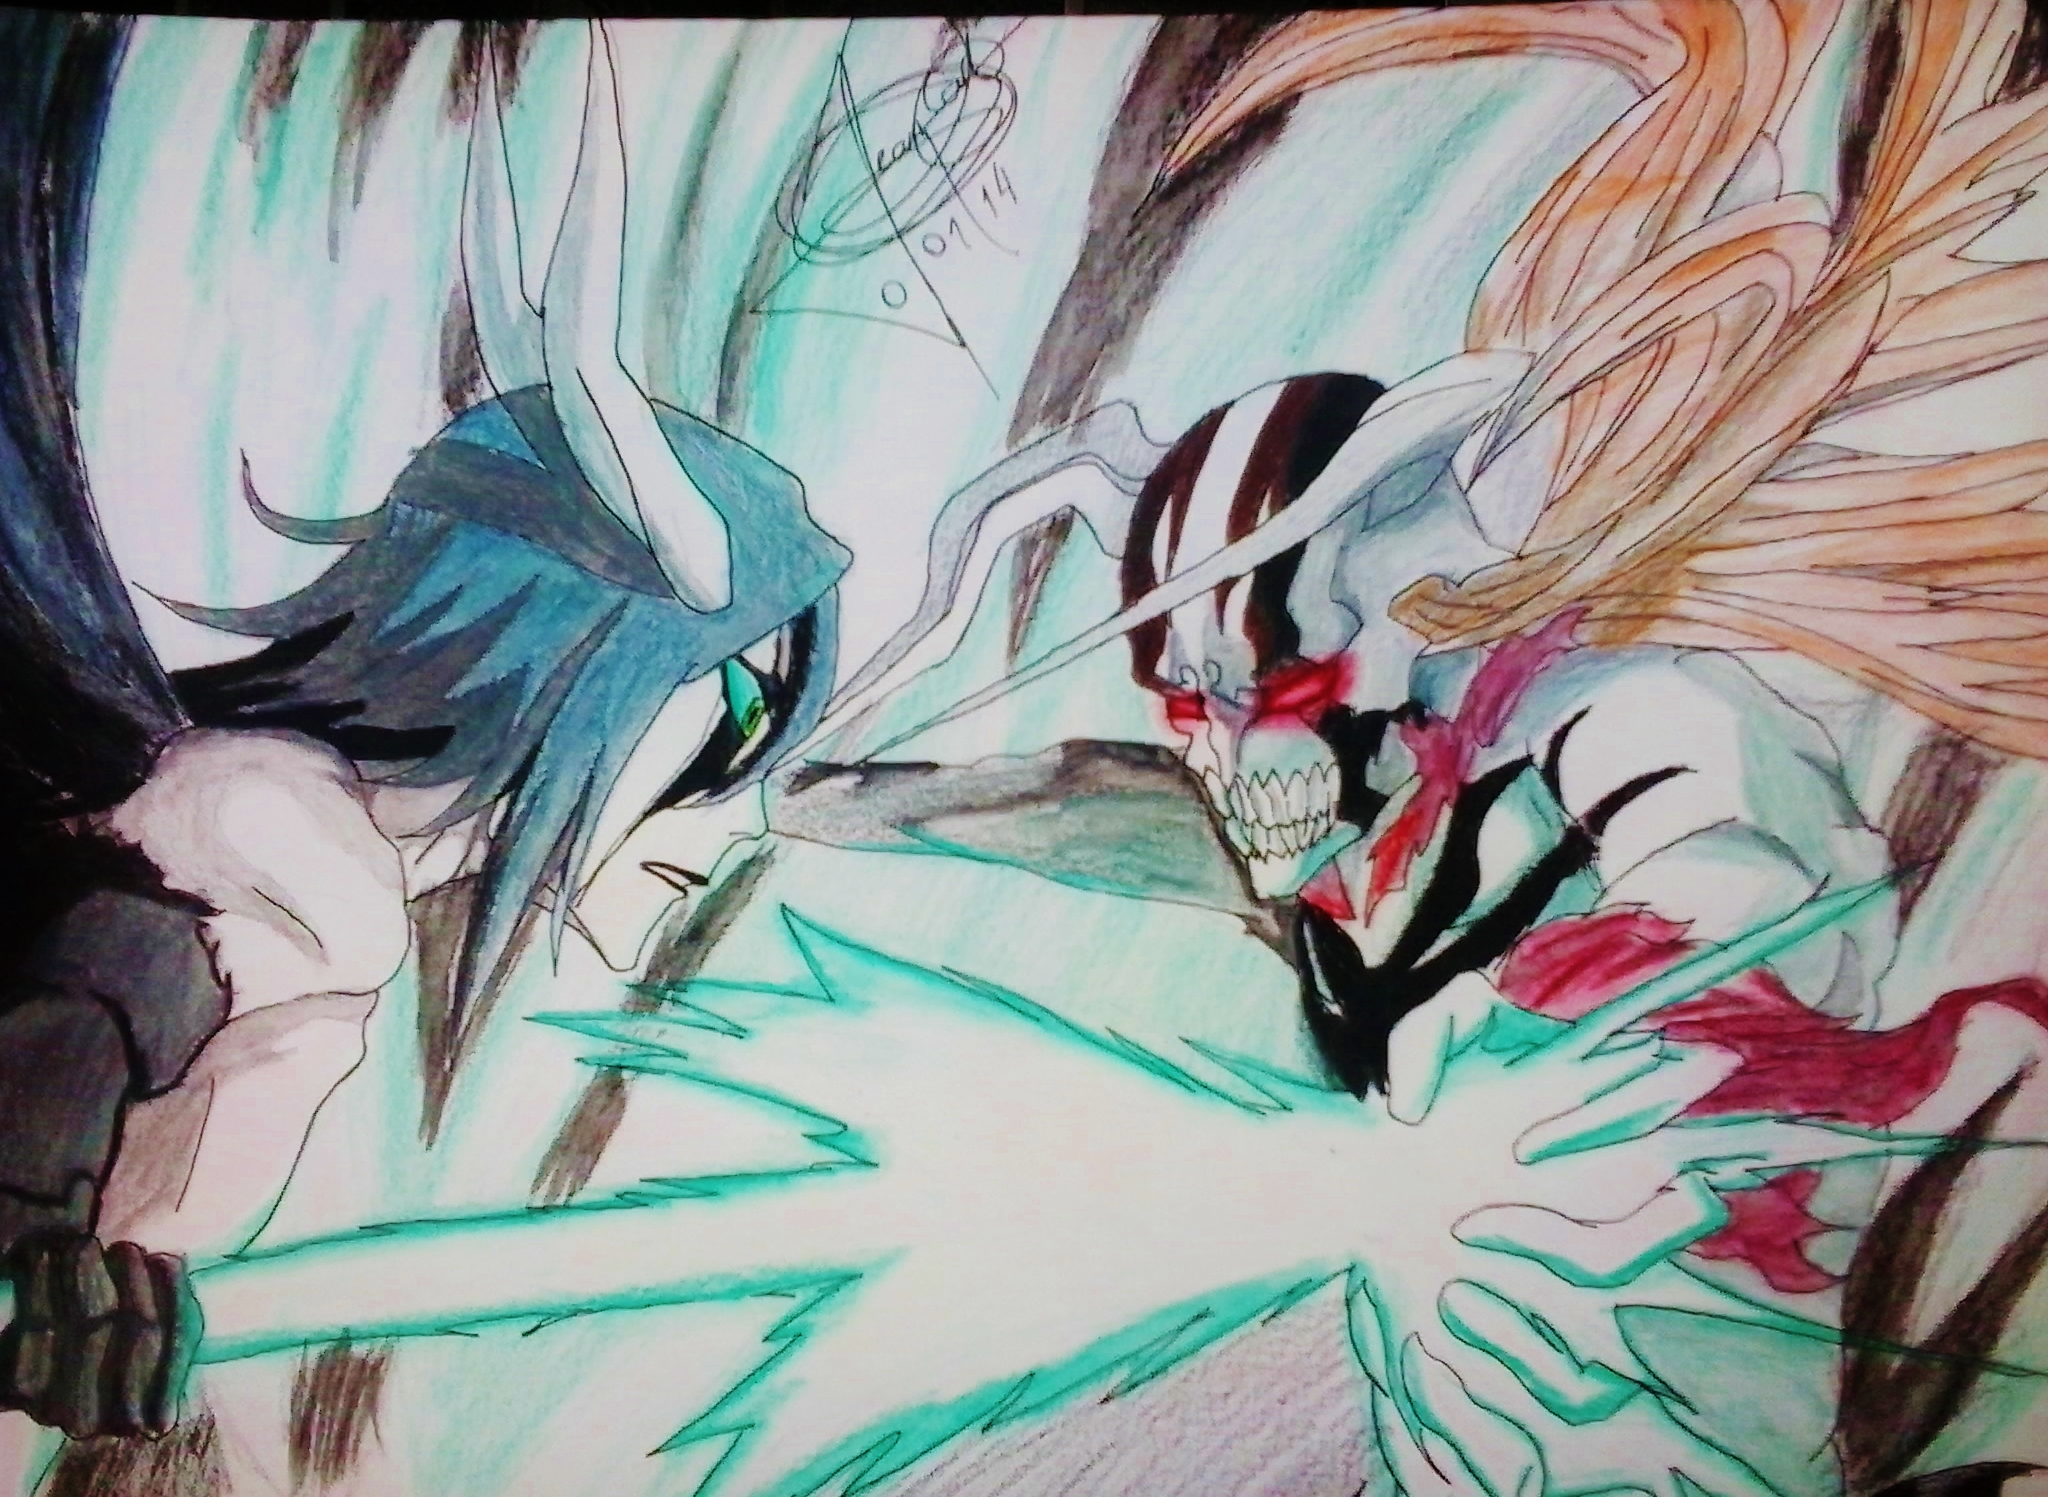 Vasto Lorde Ichigo vs Ulquiorra drawing I did. Let me know what you th